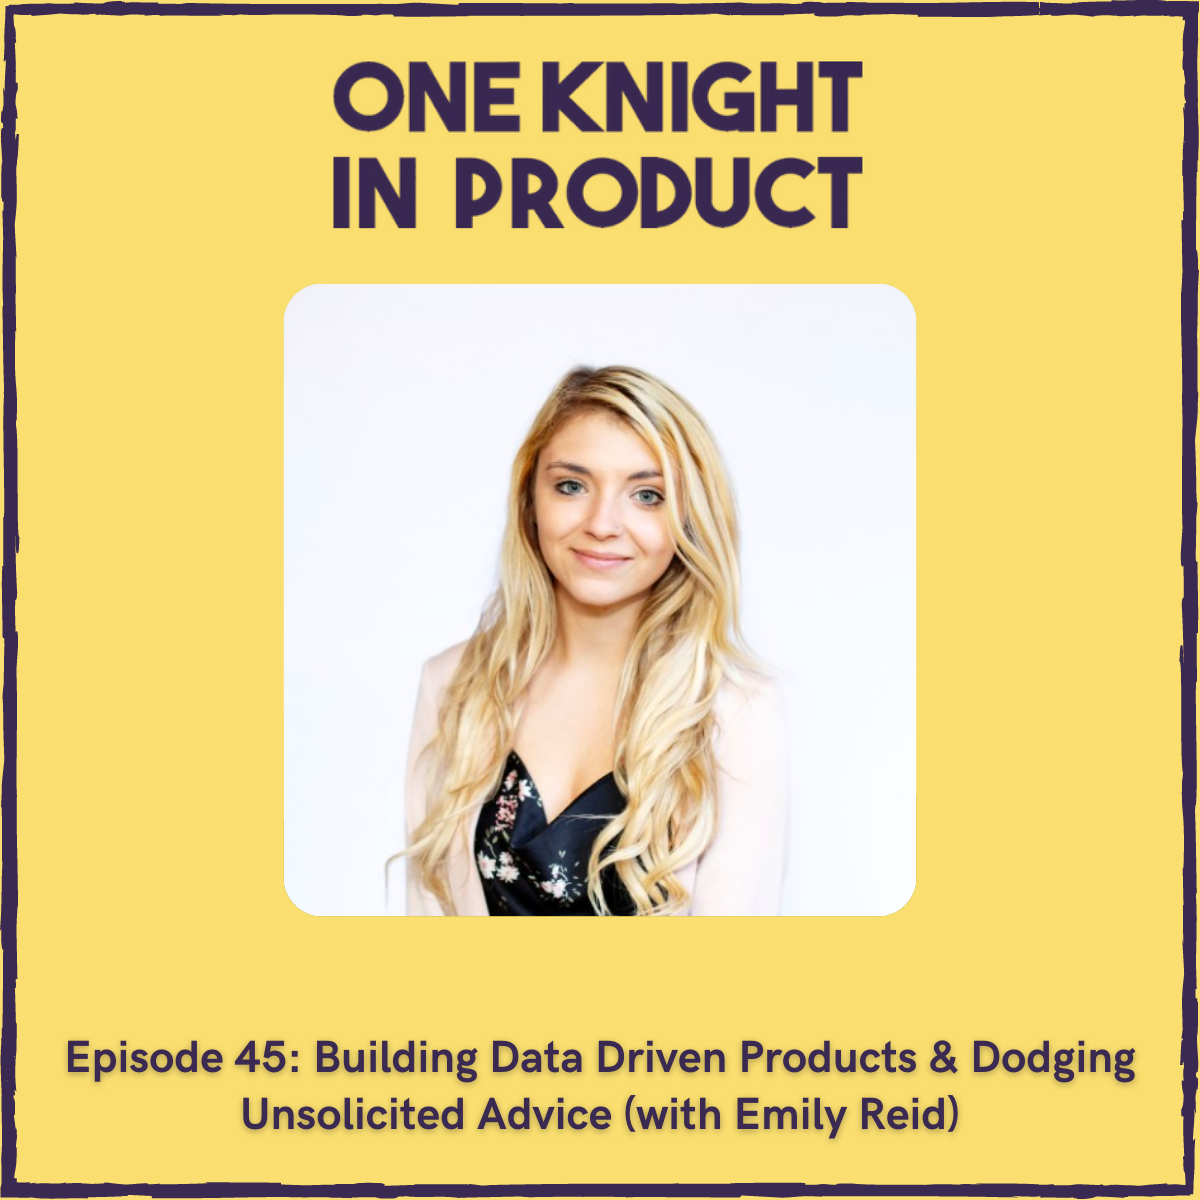 Building Data Driven Products & Dodging Unsolicited Advice (with Emily Reid, Product Manager @ FCT)